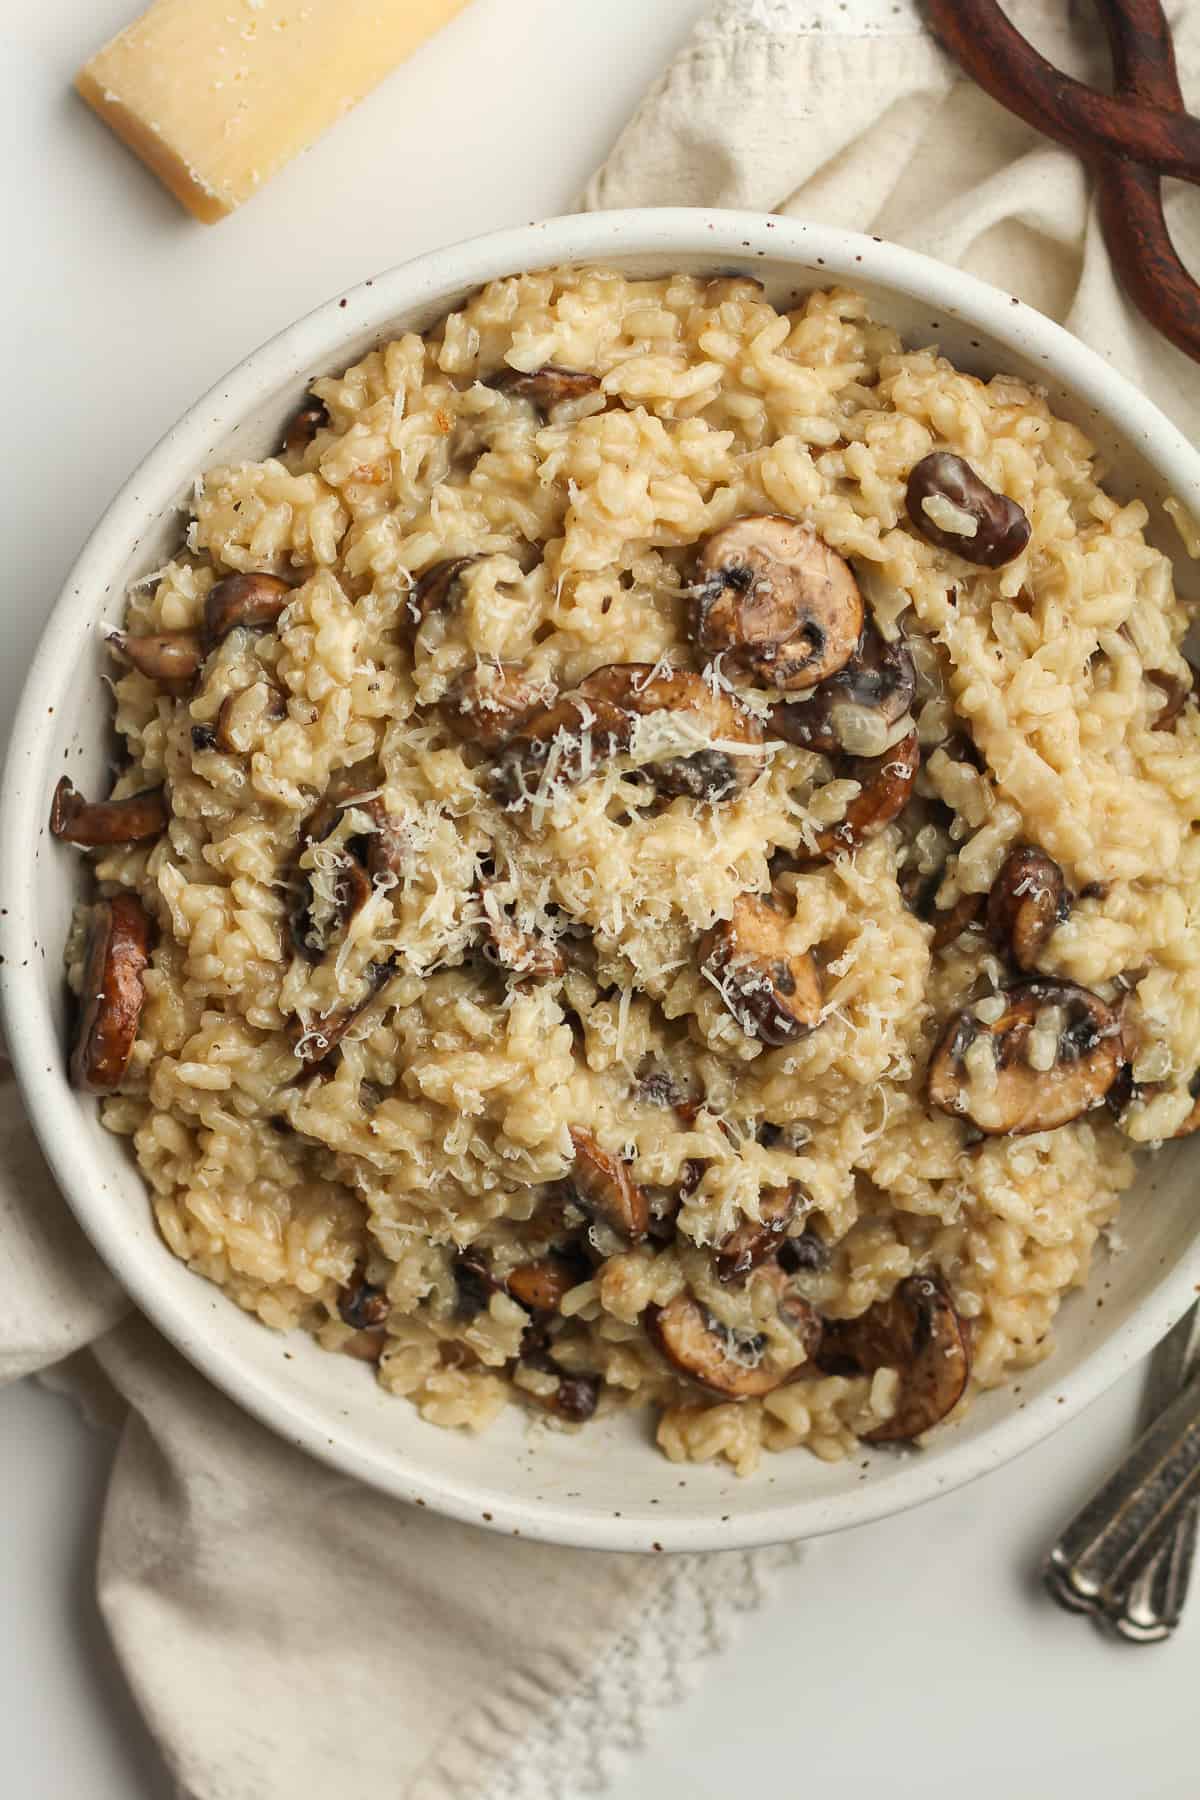 Overhead shot of a bowl of mushroom risotto, with a wedge of parmesan cheese.